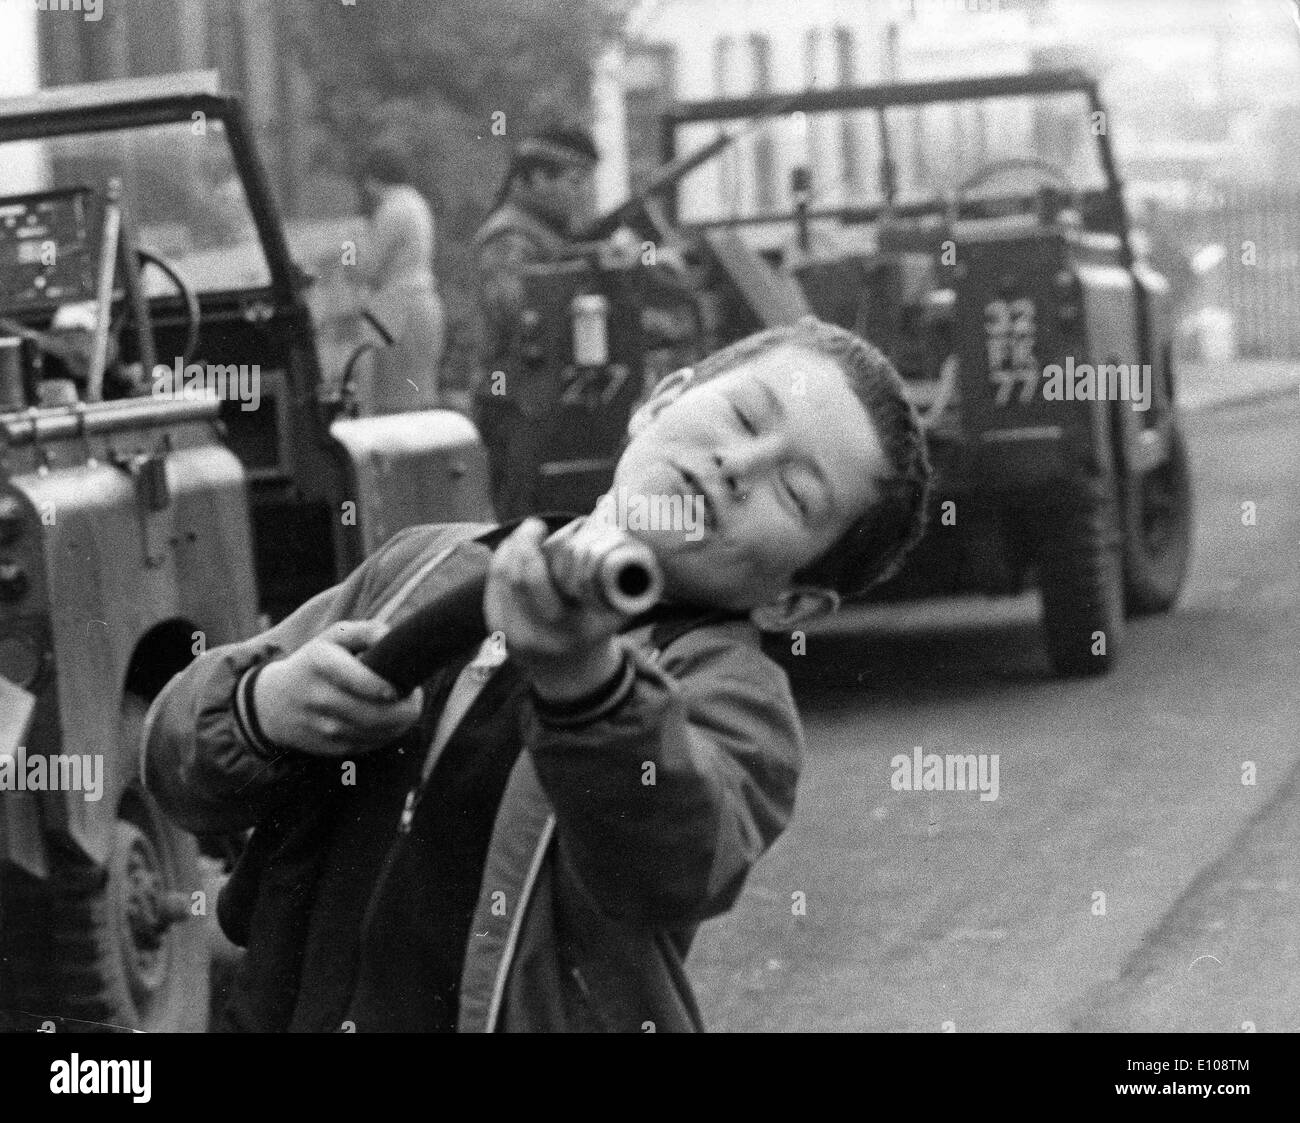 Kid with play gun. IRA The years 1970ï¿½1972 saw an explosion of political violence in Northern Ireland, peaking in 1972, when nearly 500 people lost their lives. There are several reasons why violence escalated in these years. Unionists claim the main reason was the formation of the Provisional Irish Republican Army (Provisional IRA), a group formed when the IRA split into the Provisional and Official factions. While the older IRA had embraced non-violent civil agitation, the new Provisional IRA was determined to wage 'armed struggle' against British rule in Northern Ireland Stock Photo